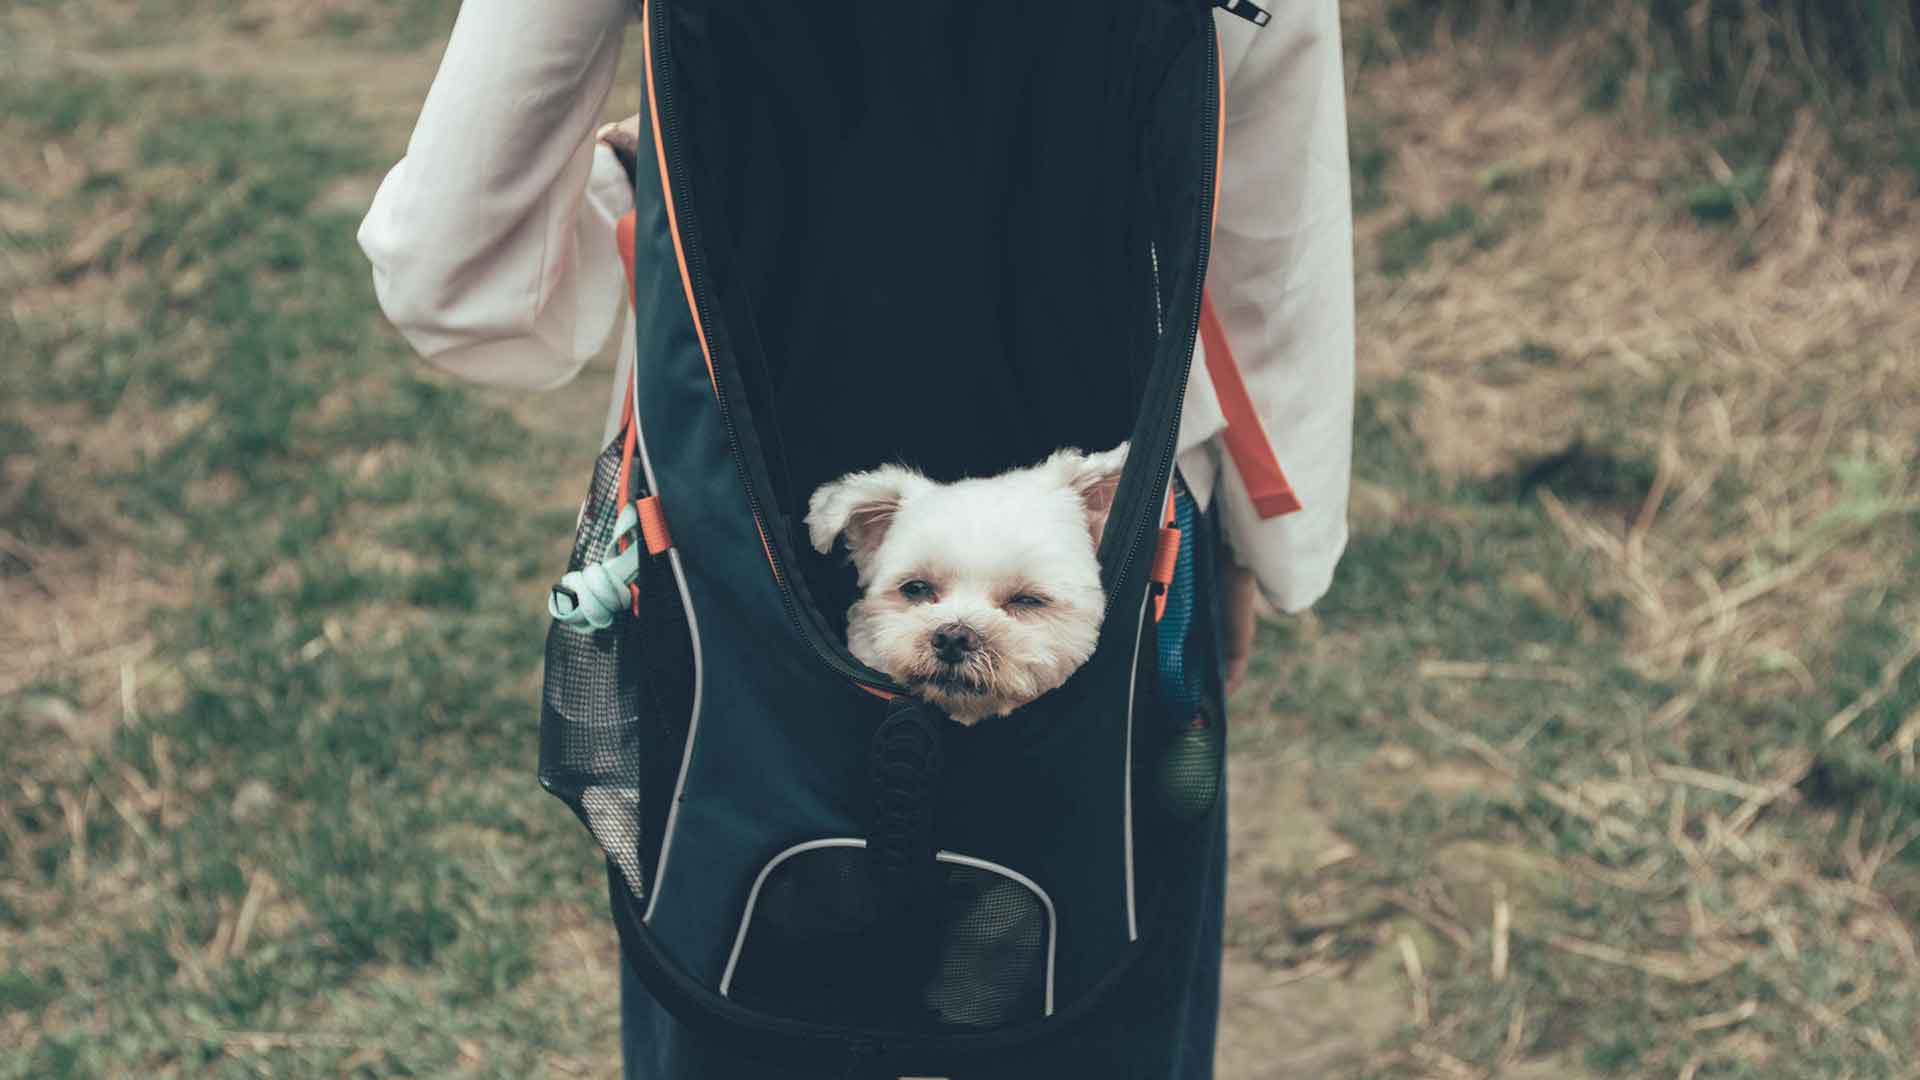 This small dog in a backpack could be key to sustainable growth for one company